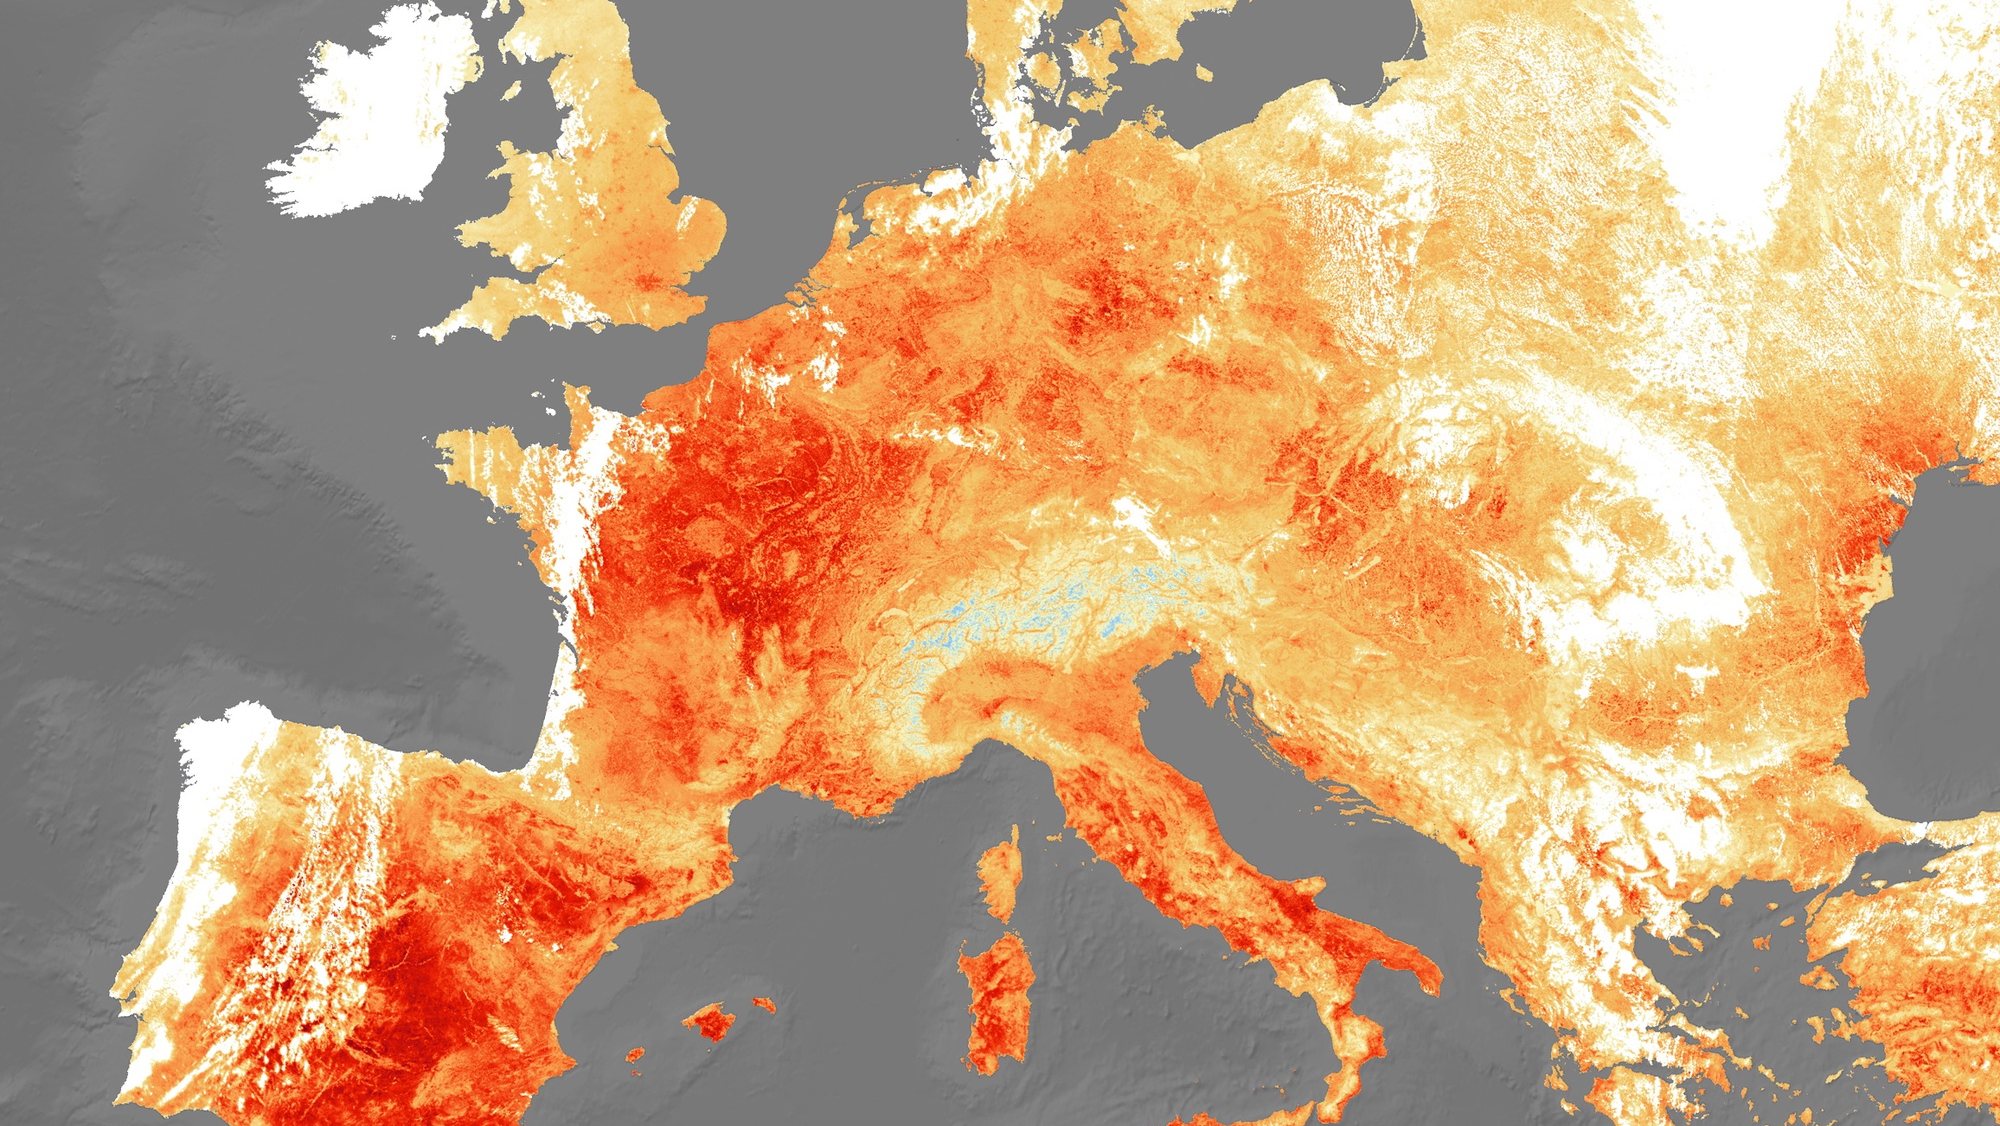 epa07742016 A handout photo made available by the European Space Agency (ESA) shows a map generated using the Copernicus Sentinel-3&#039;s Sea and Land Surface Temperature Radiometer of an extreme heatwave that hit Europe on 25 July 2019 (issued 26 July 2019). High temperatures on 25 July 2019, reached as high as 39-40 degrees Celsius, with Netherlands, Belgium and Germany recording their highest ever temperatures. Paris reached a sweltering 41-degree Celsius, breaking its previous record in 1947. This map represents the real temperature of the land surface as the satellite measures the real amount of energy radiating from Earth. Clouds in the image are visible in white while snow-covered areas are represented in light blue.  EPA/EUROPEAN SPACE AGENCY HANDOUT  HANDOUT EDITORIAL USE ONLY/NO SALES